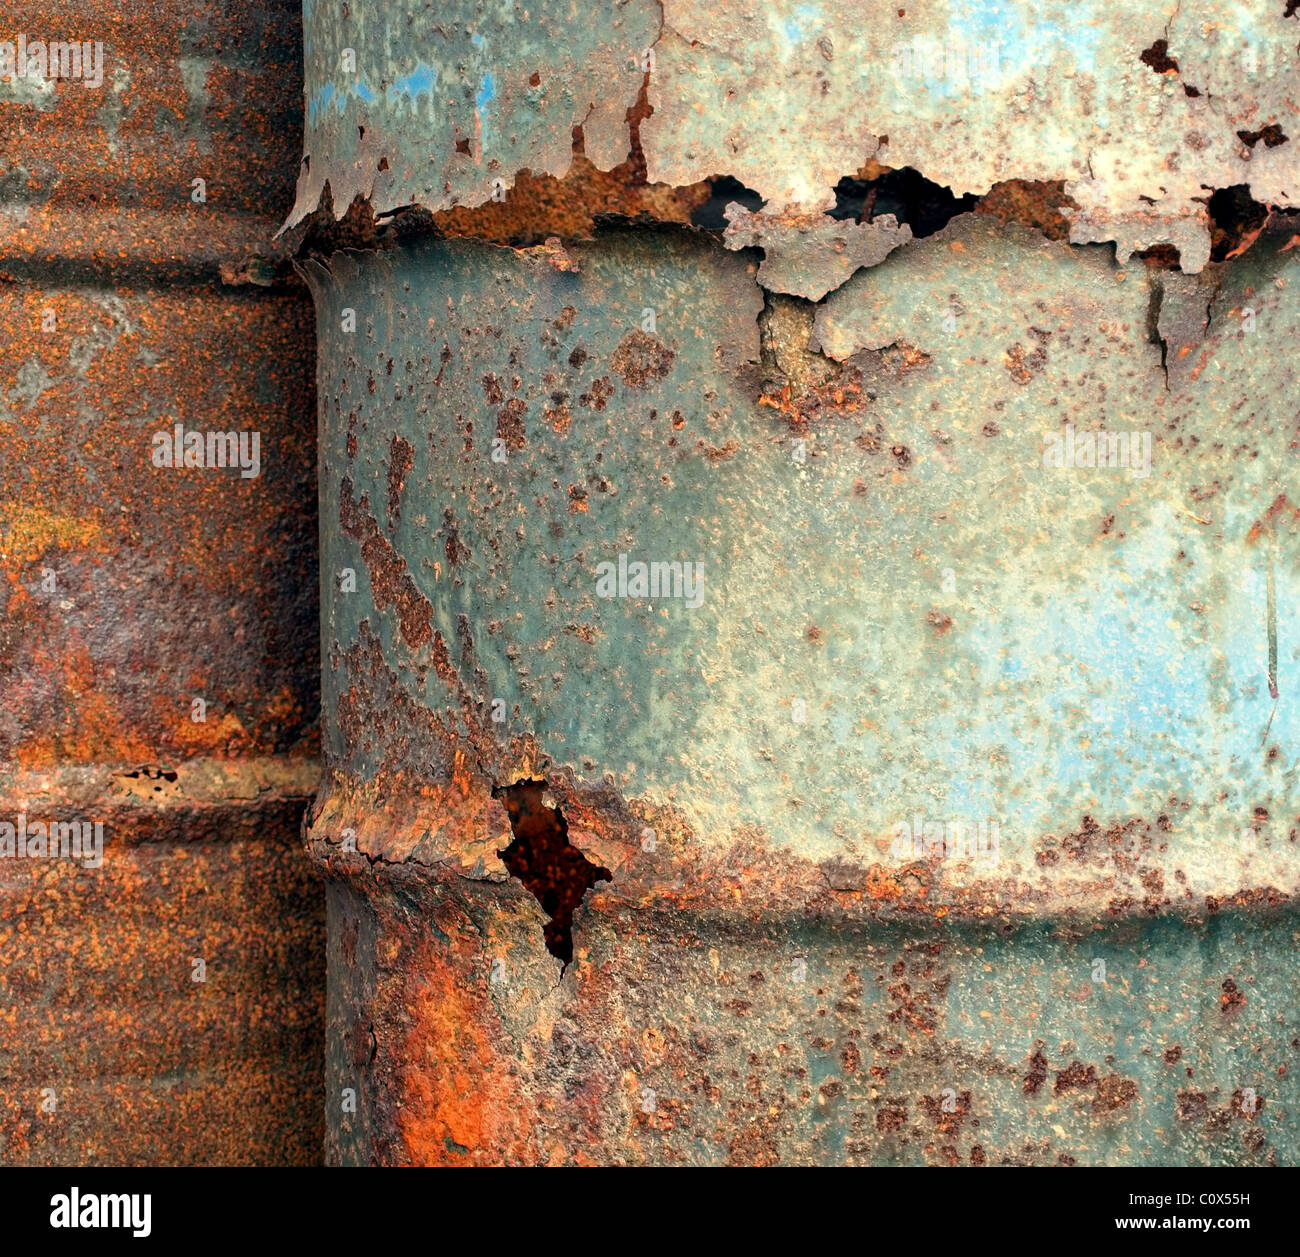 Heavily Corroded Rusted Oil Barrels Stock Photo